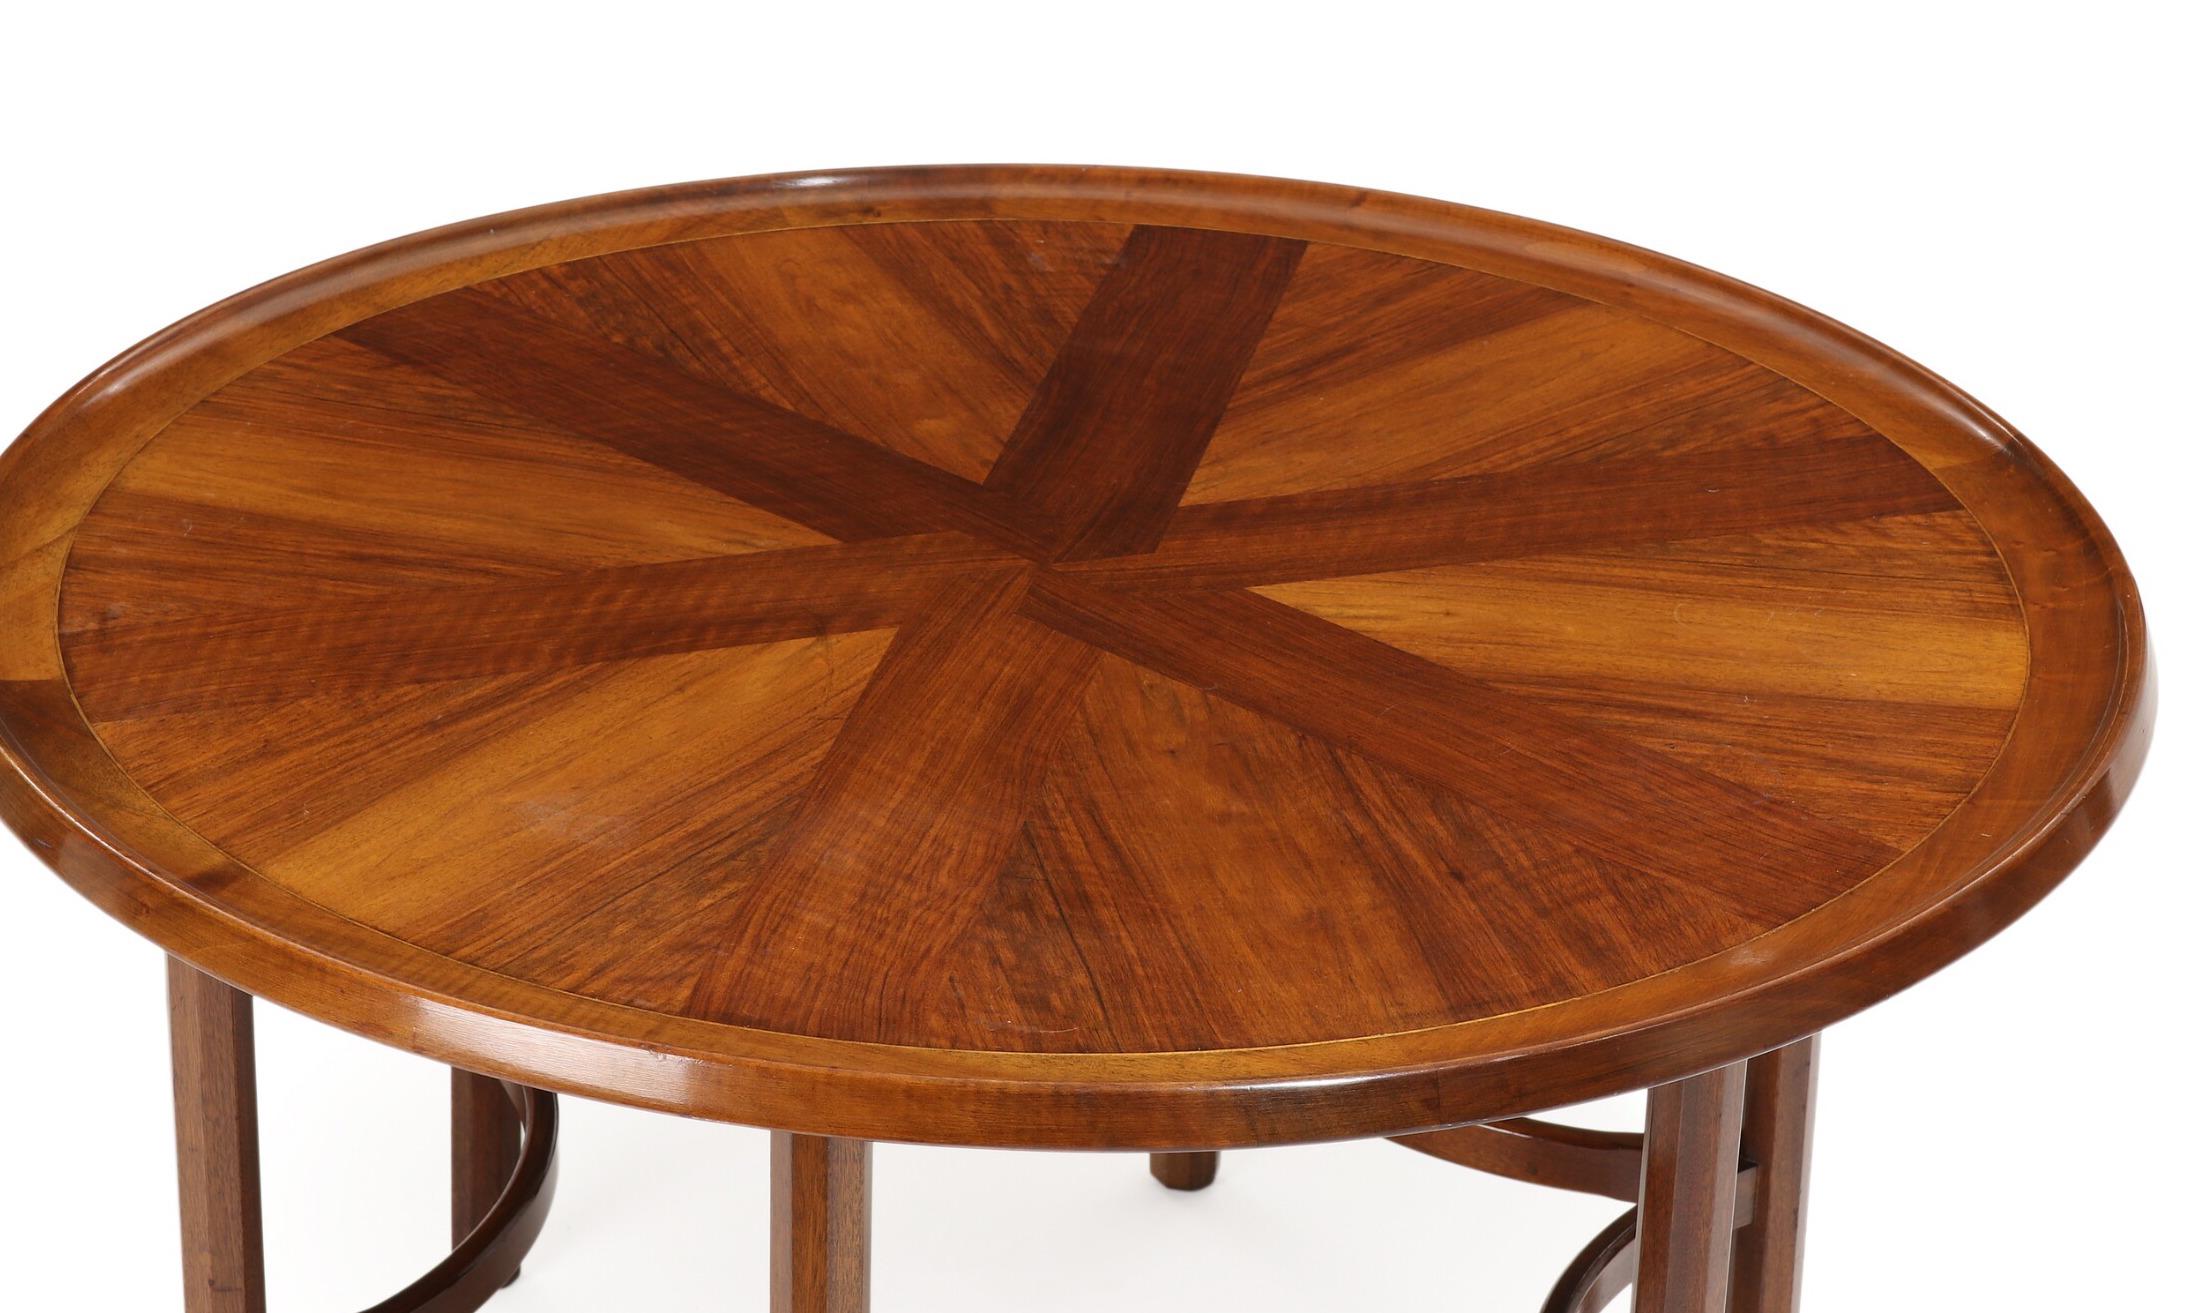 Carved Danish Modern Round Coffee Table